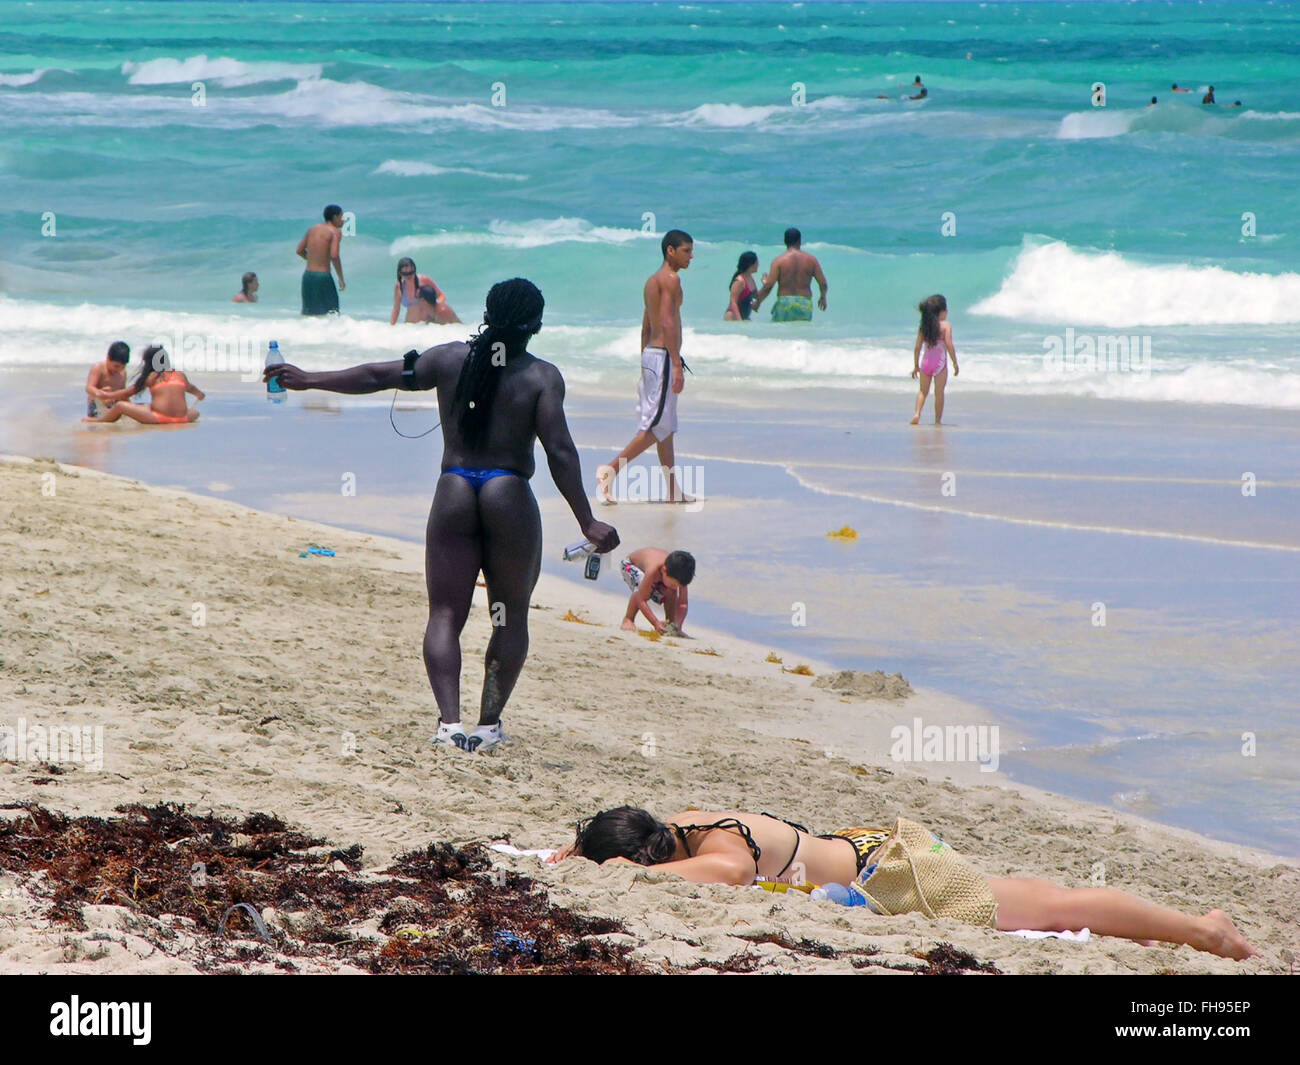 Miami, Florida, USA - May 28, 2007: A man in costume, of African origin, listen to music and do exercises on the beach, while a Stock Photo